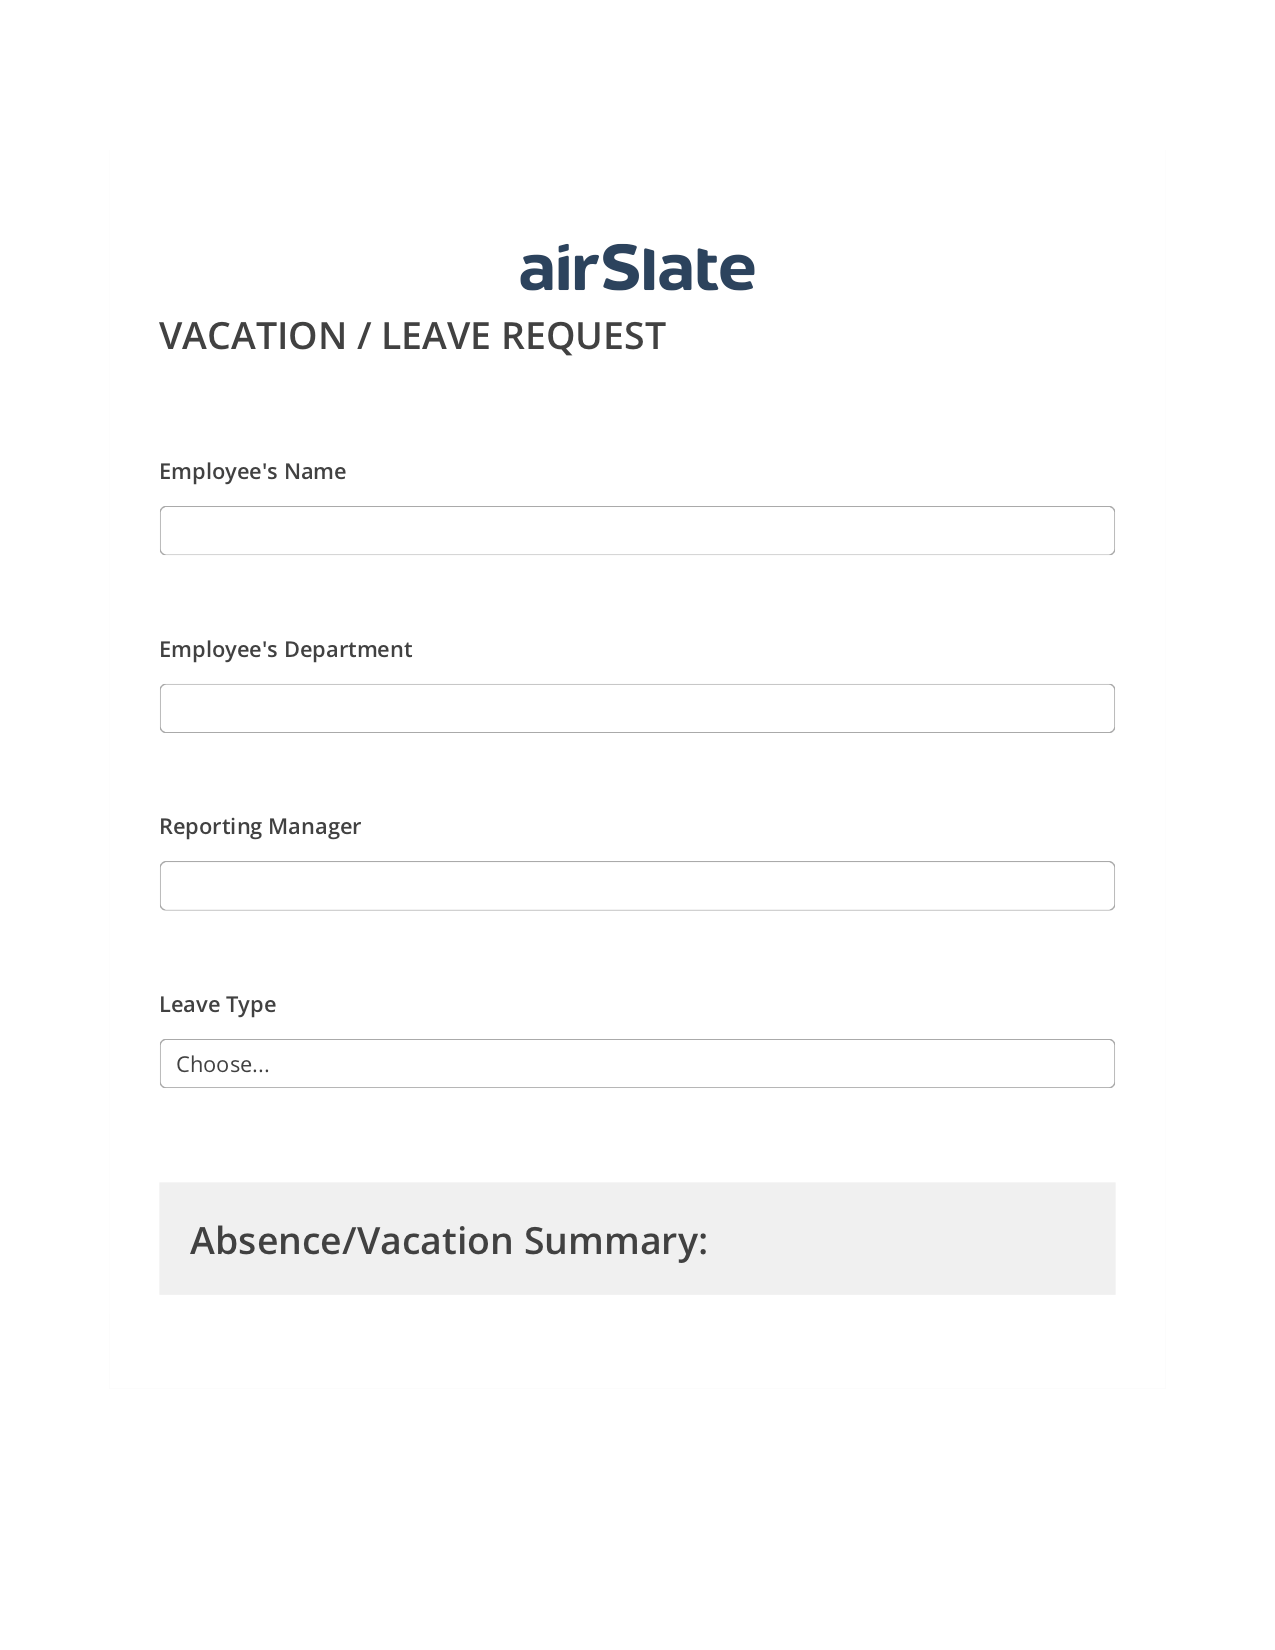 Vacation/Leave Request Workflow System Bot - Slack Two-Way Binding Bot, Create MS Dynamics 365 Records Bot, Archive to Dropbox Bot